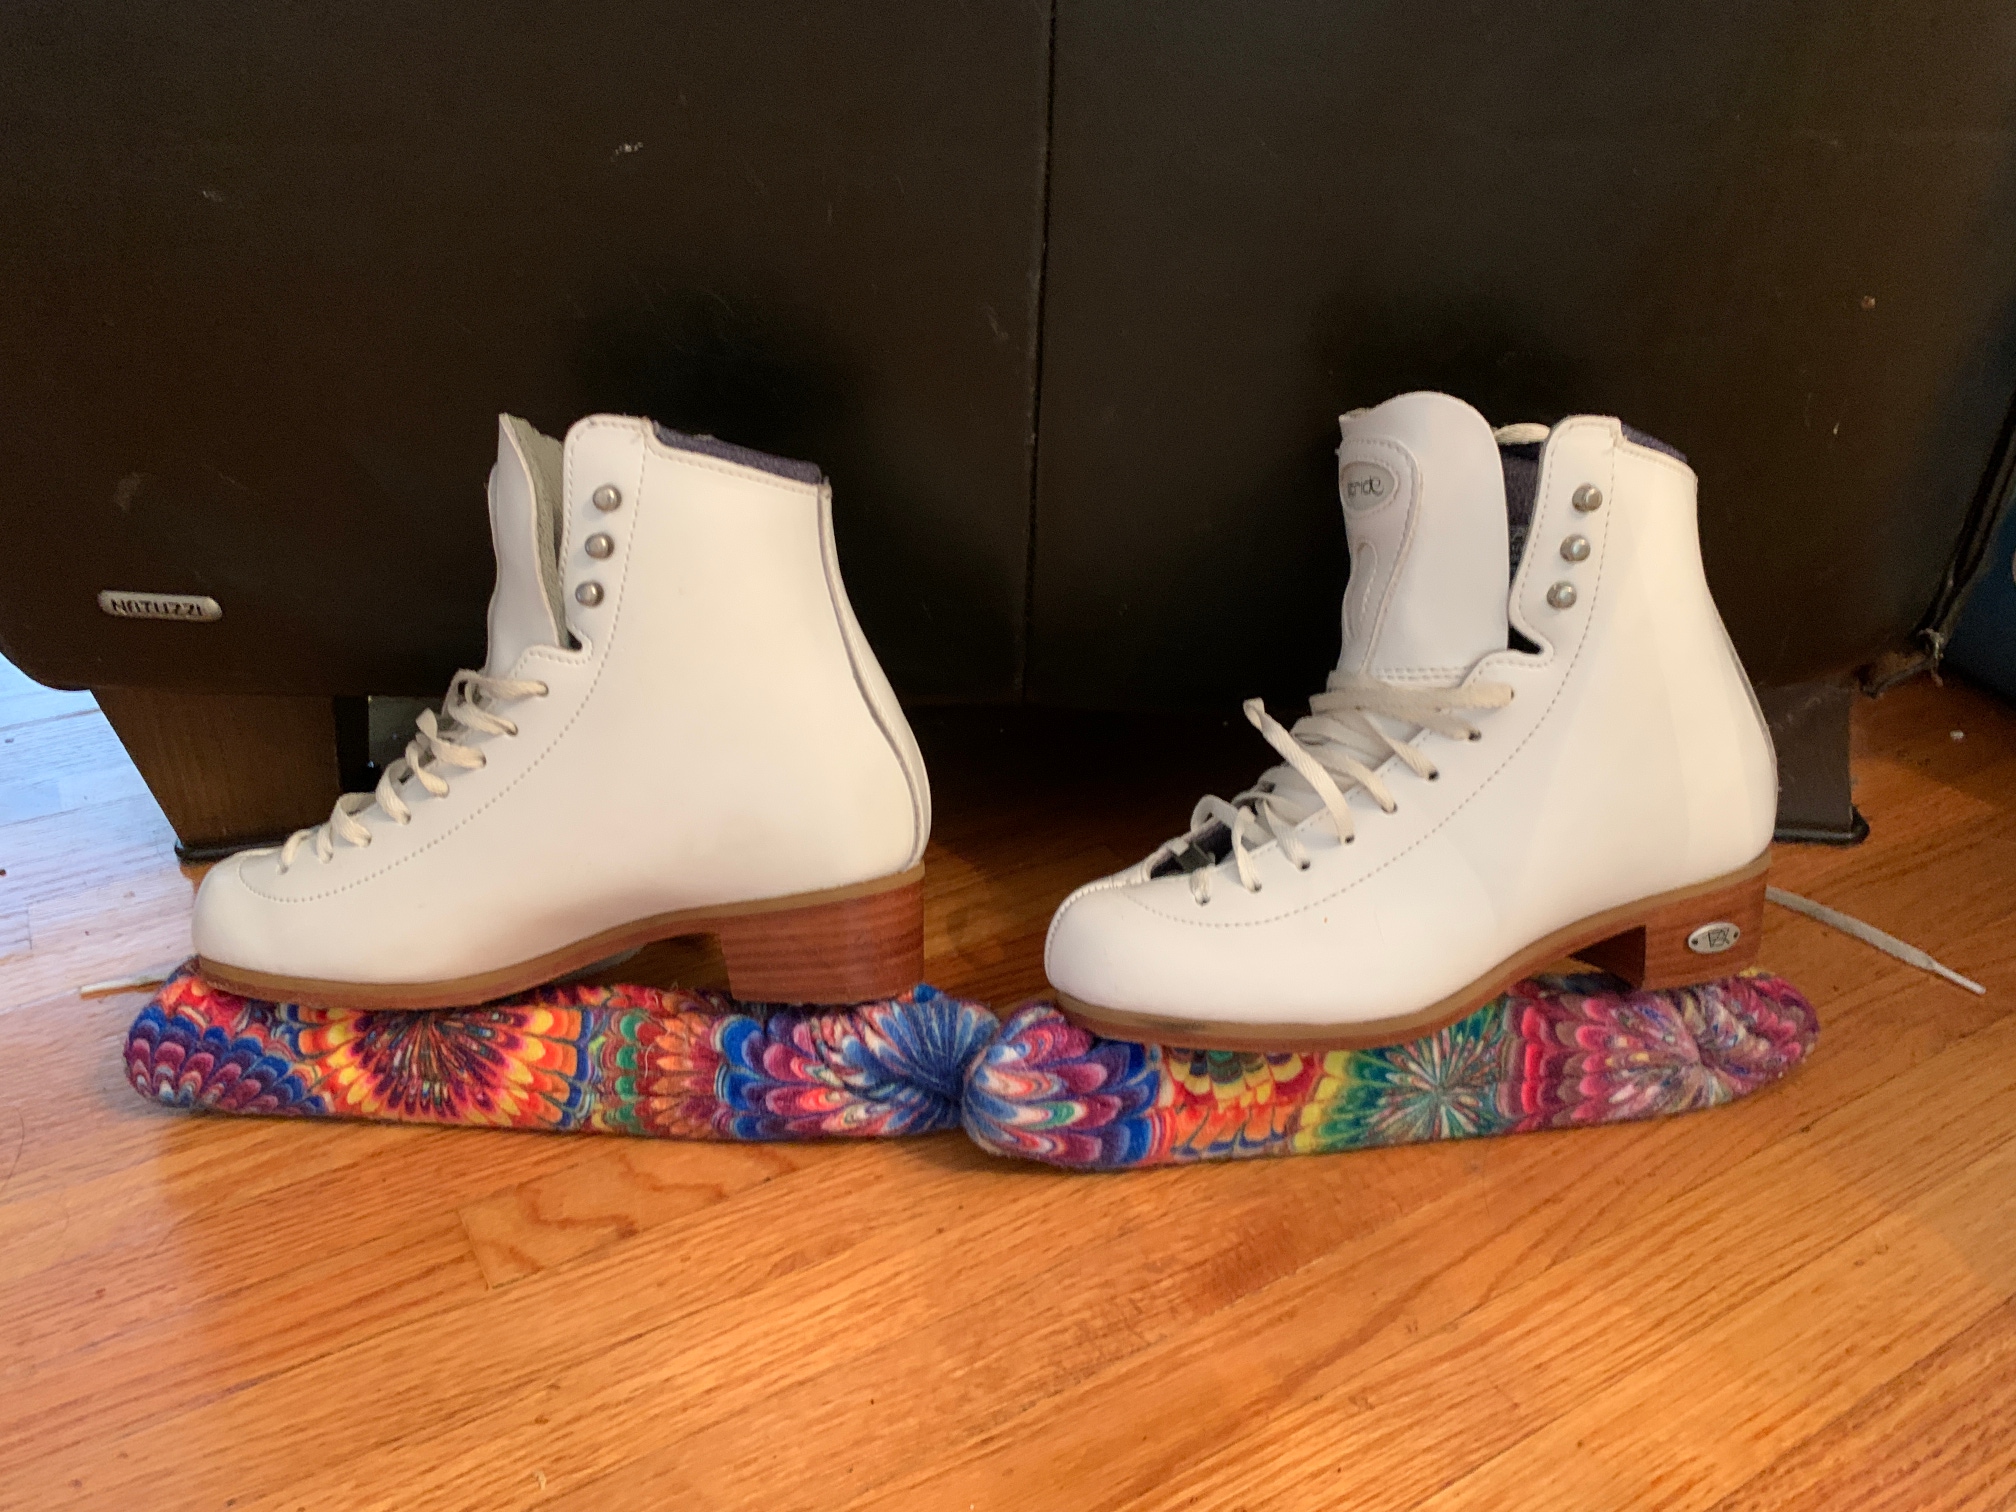 Riedell Stride Model 23 Figure Skates Size 3.5 med. - used excellent condition